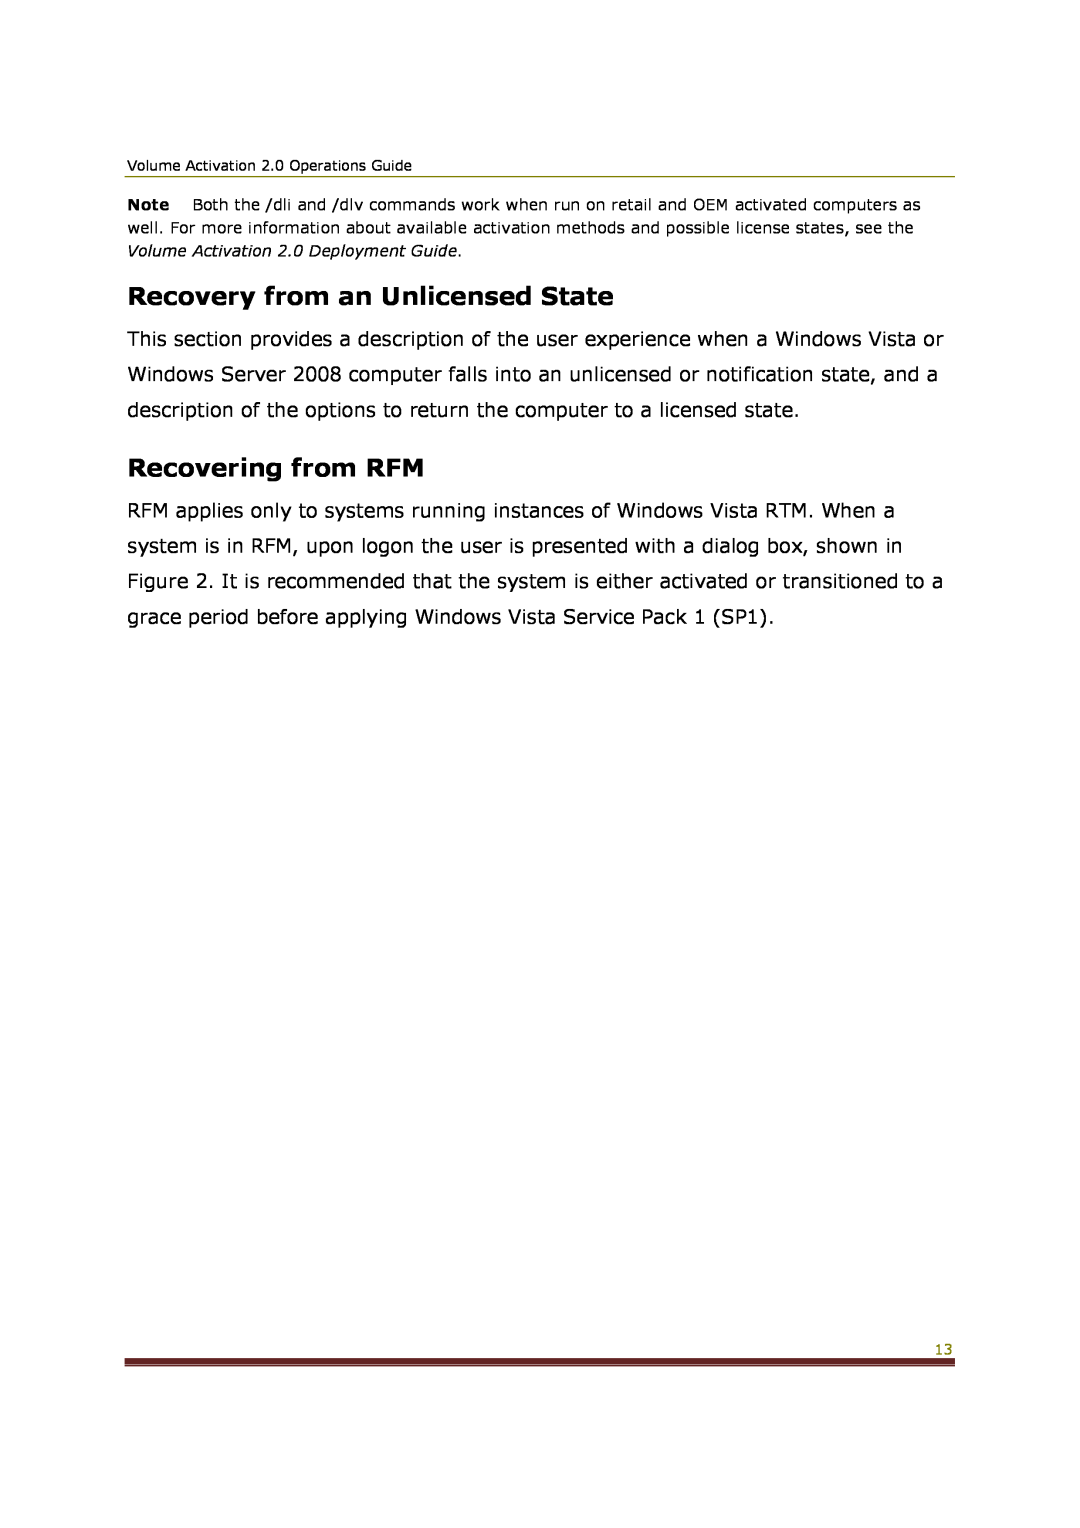 Microsoft 2 manual Recovery from an Unlicensed State, Recovering from RFM 